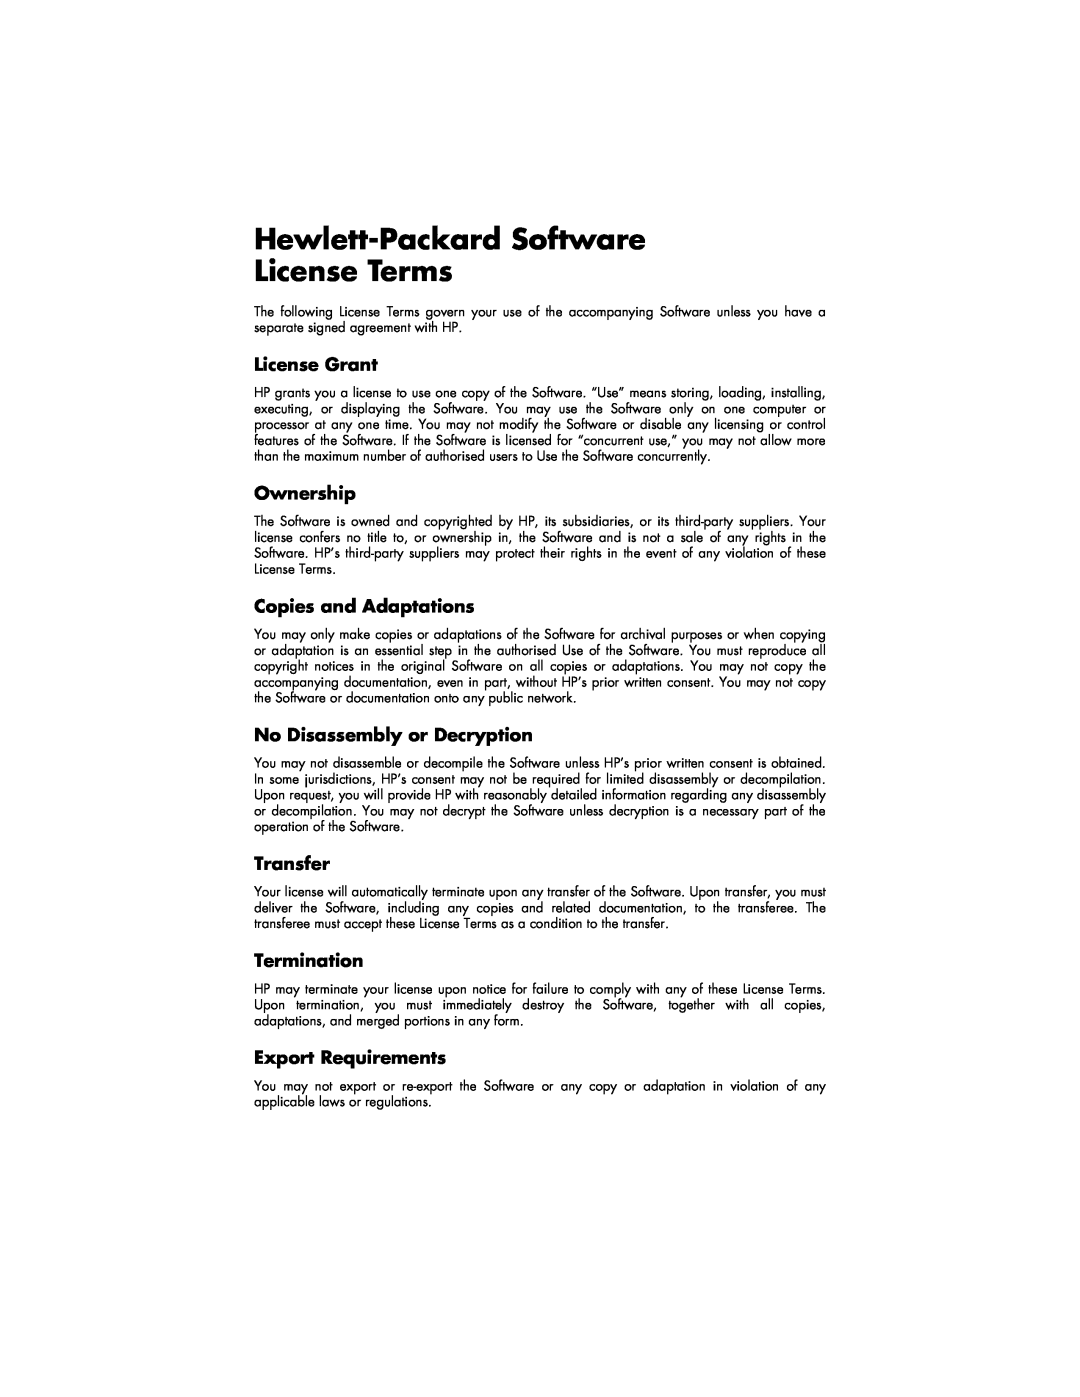 HP a110.uk Hewlett-Packard Software License Terms, License Grant, Ownership, Copies and Adaptations, Transfer, Termination 